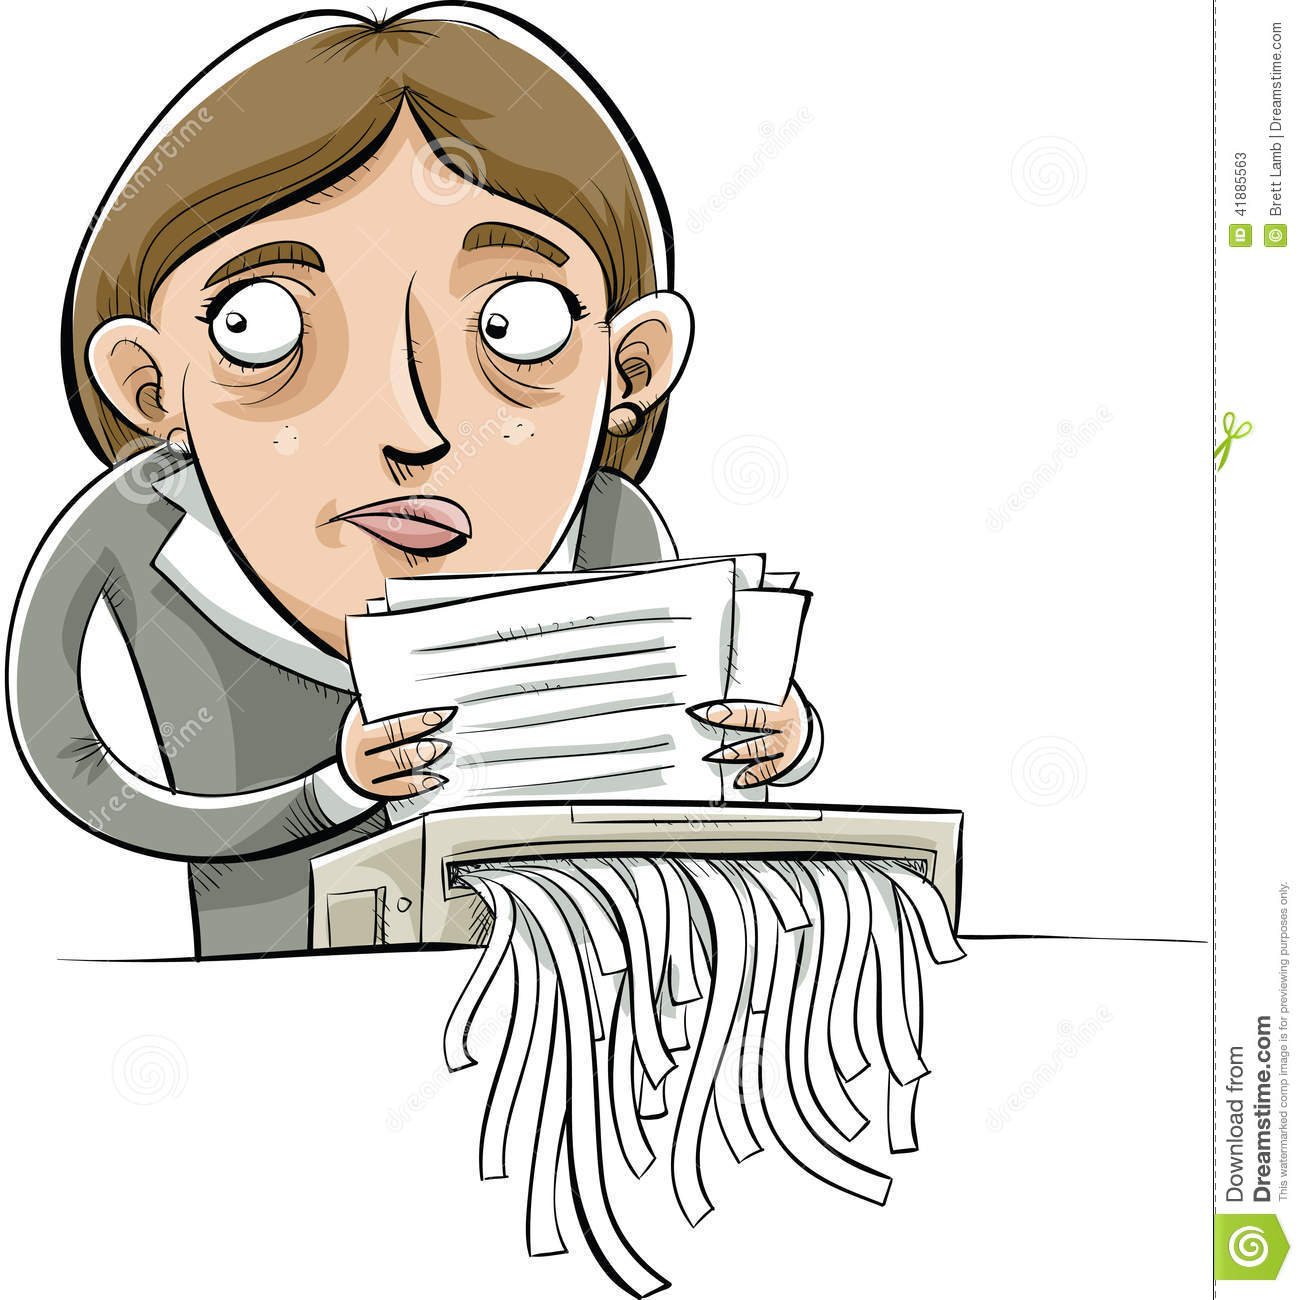 document-shred-cartoon-businesswoman-shreds-paper-documents-guilty-look-her-face-41885563.jpg